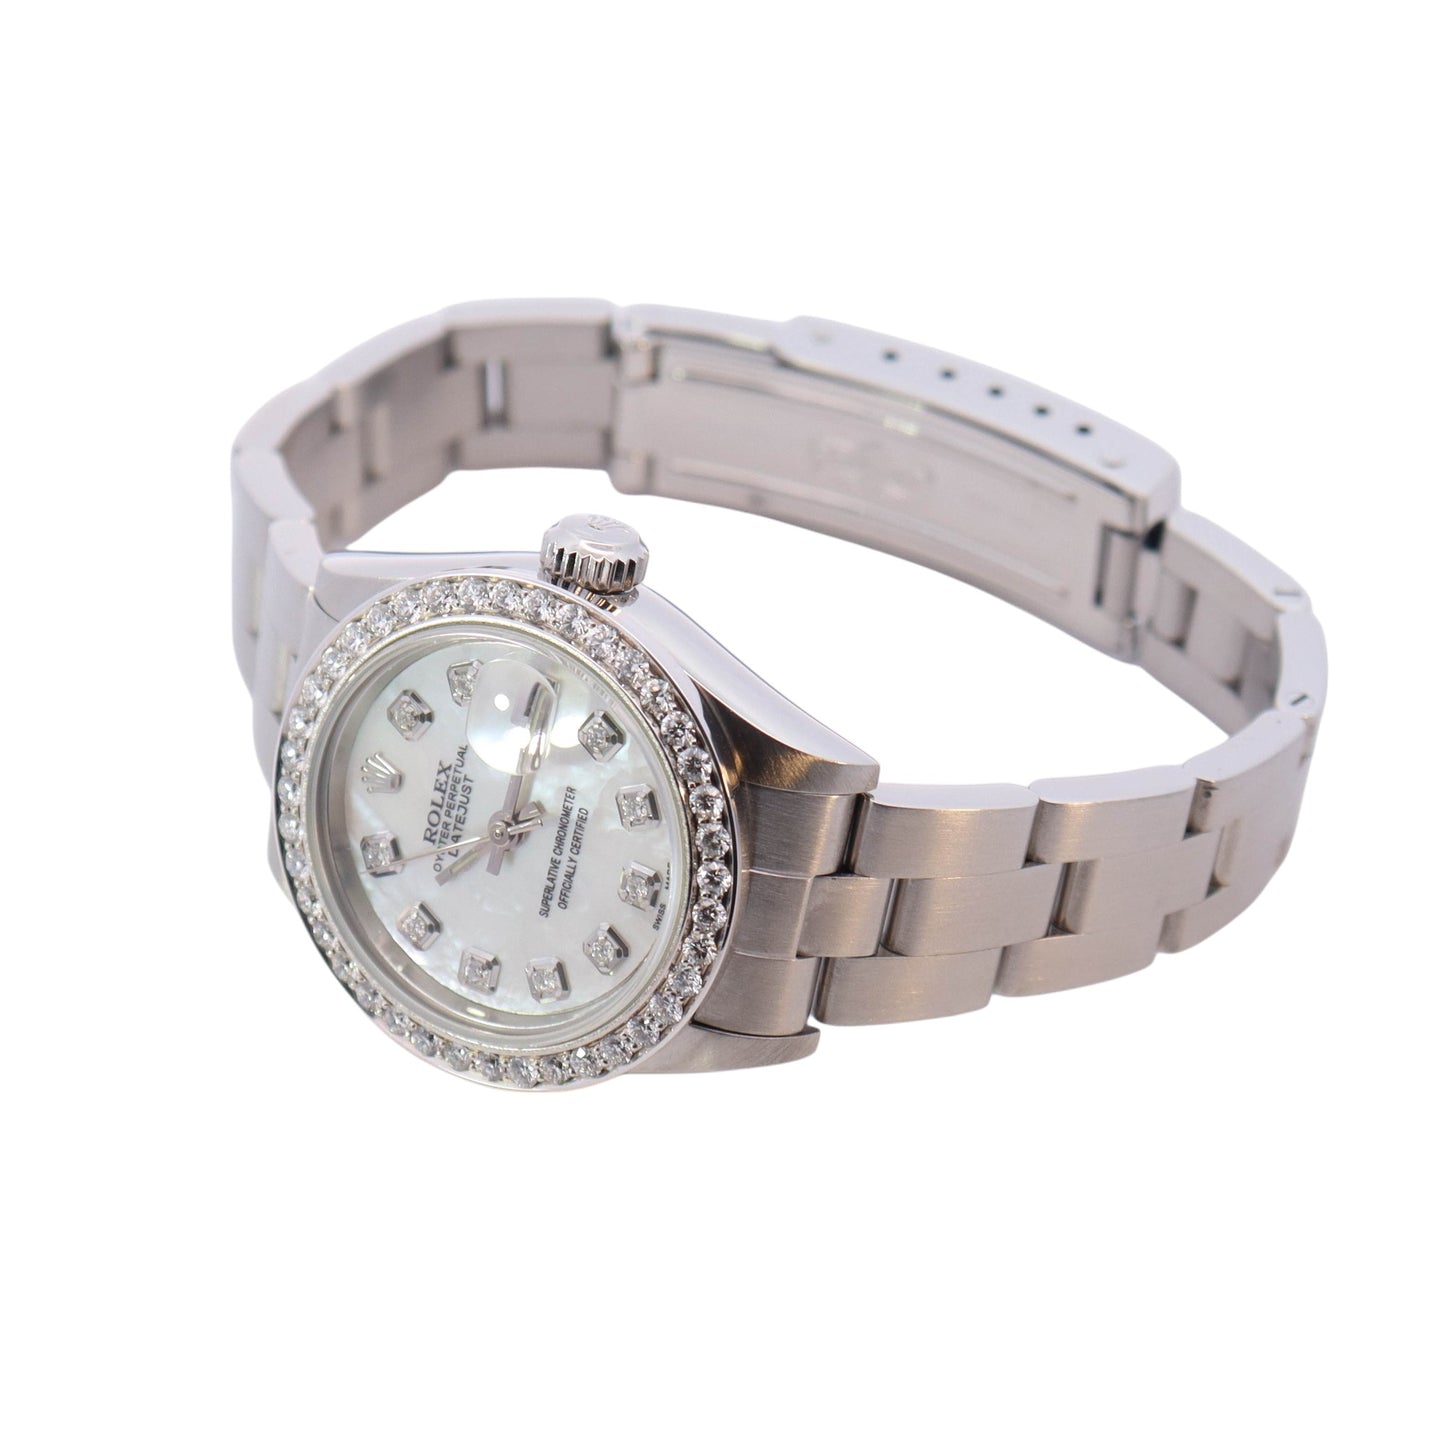 Rolex Oyster Perpetual Date Stainless Steel 26mm White MOP Diamond Dial Watch  Reference #: 79190